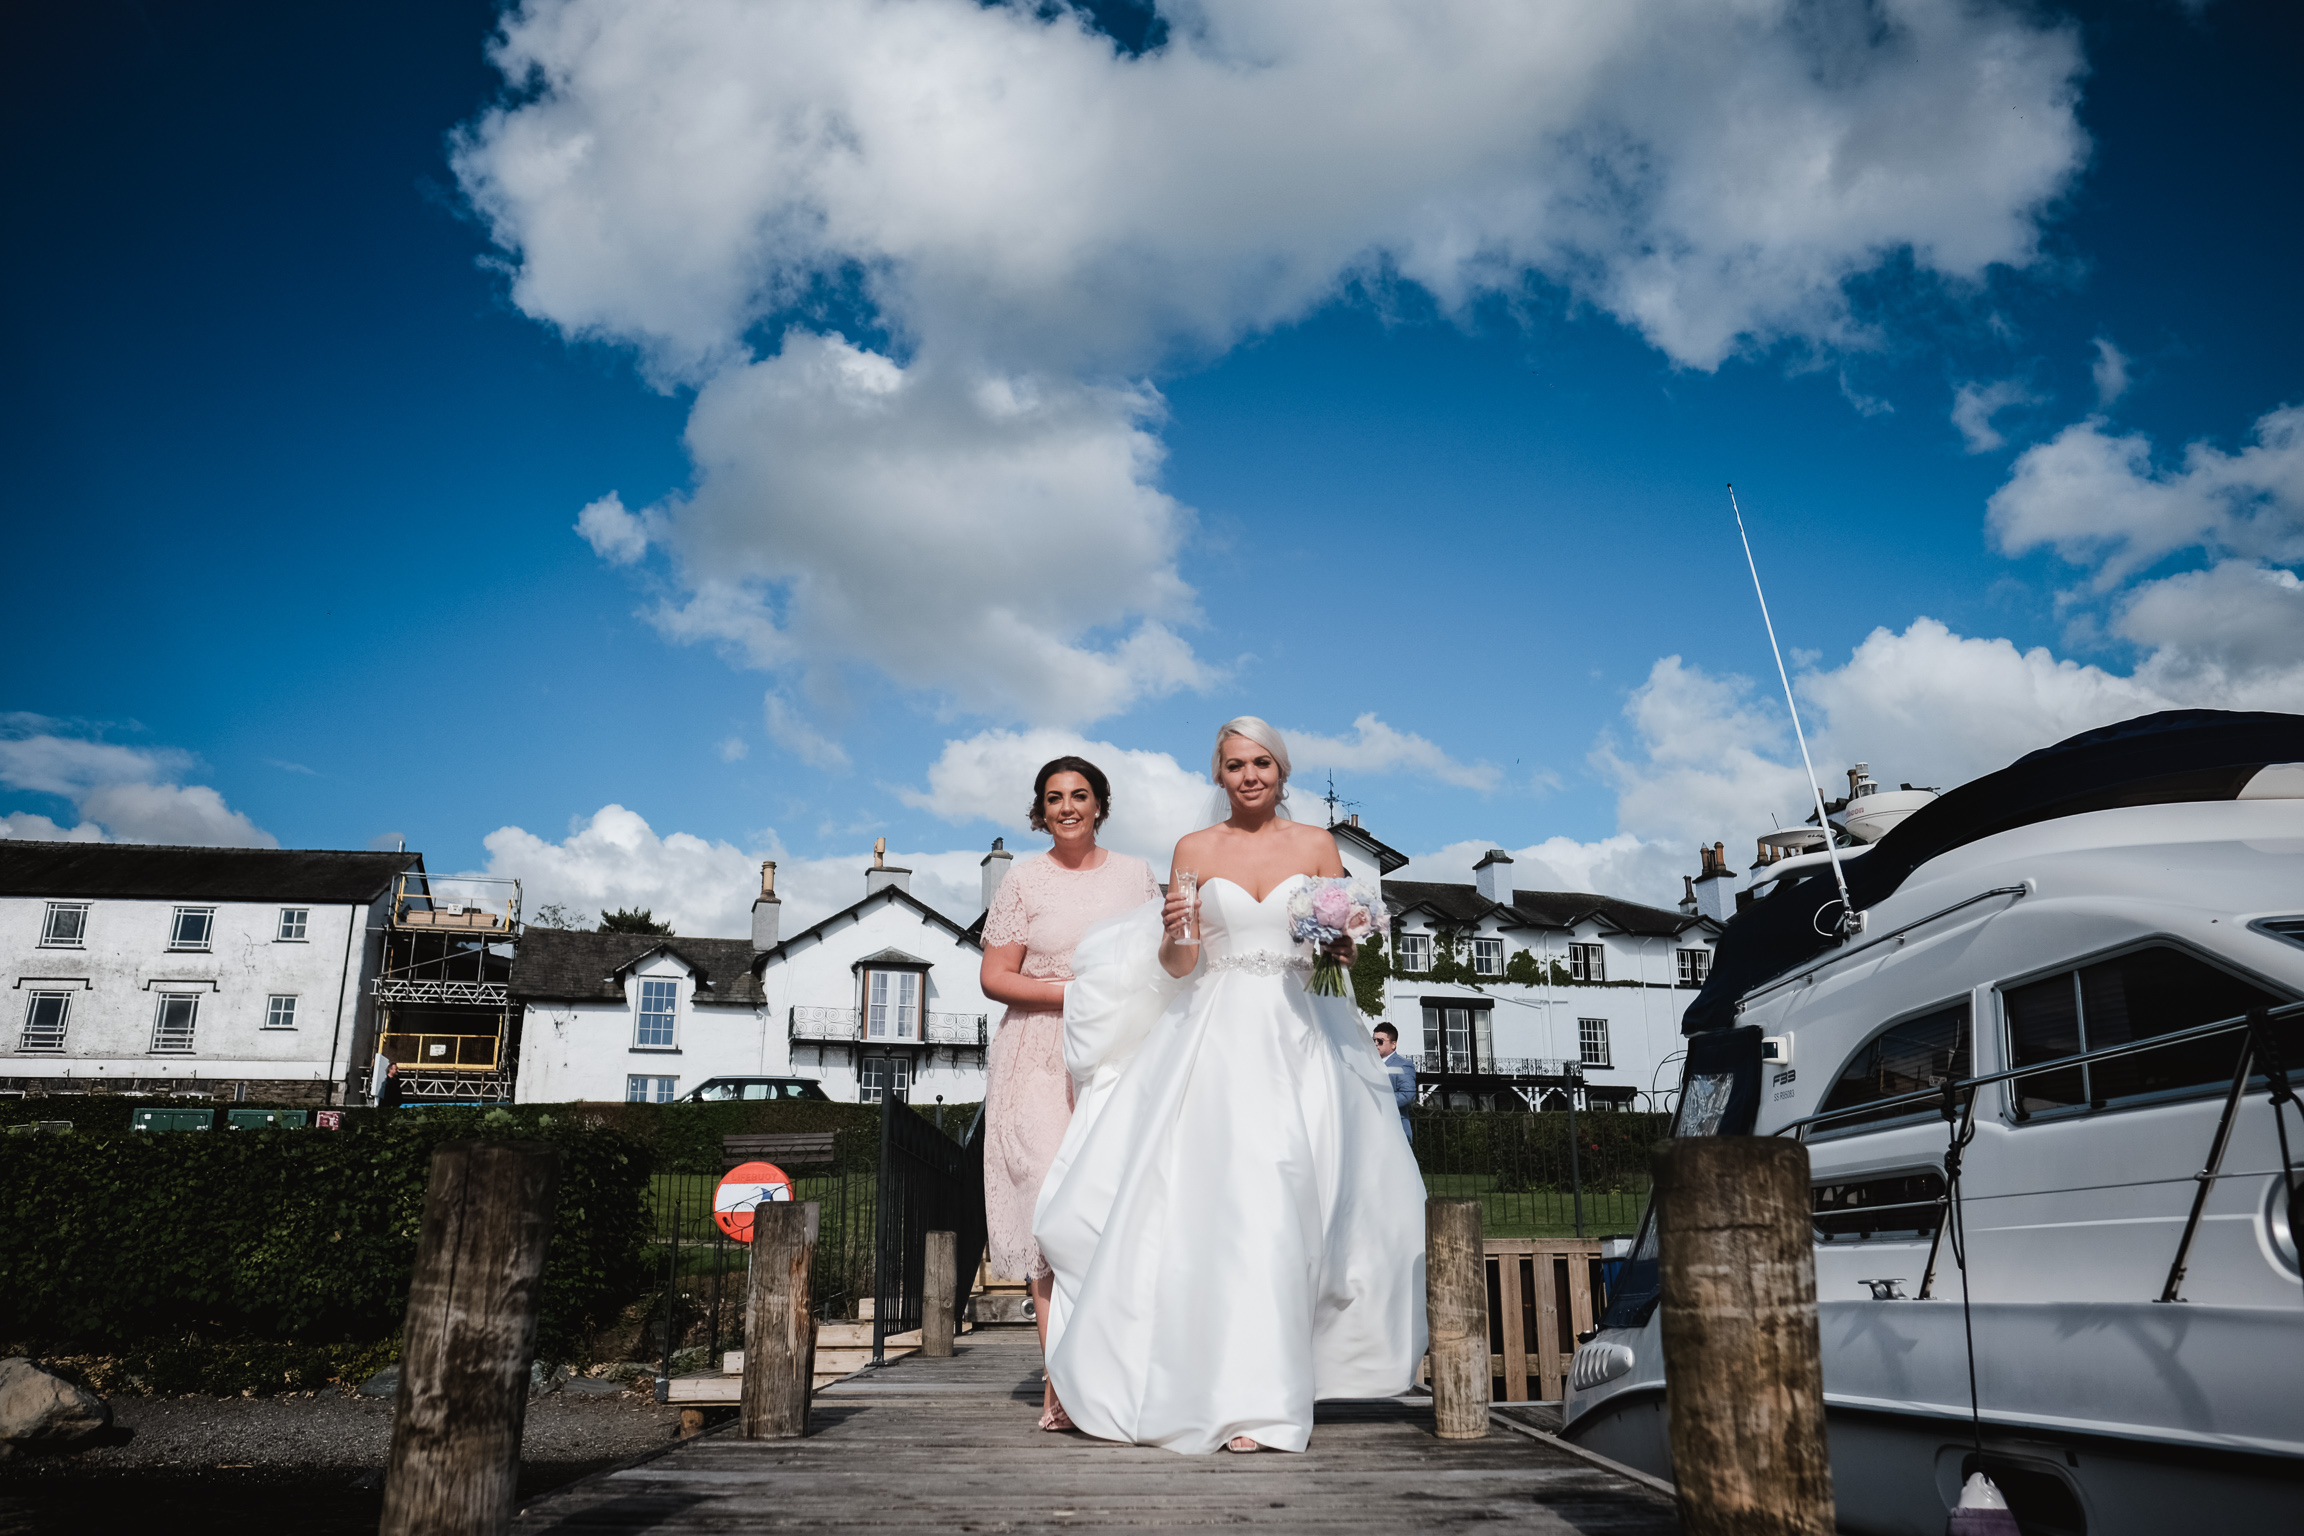 Low wood bay wedding photographer in widermere documentry wedding photography north west cumbria (87 of 131).jpg